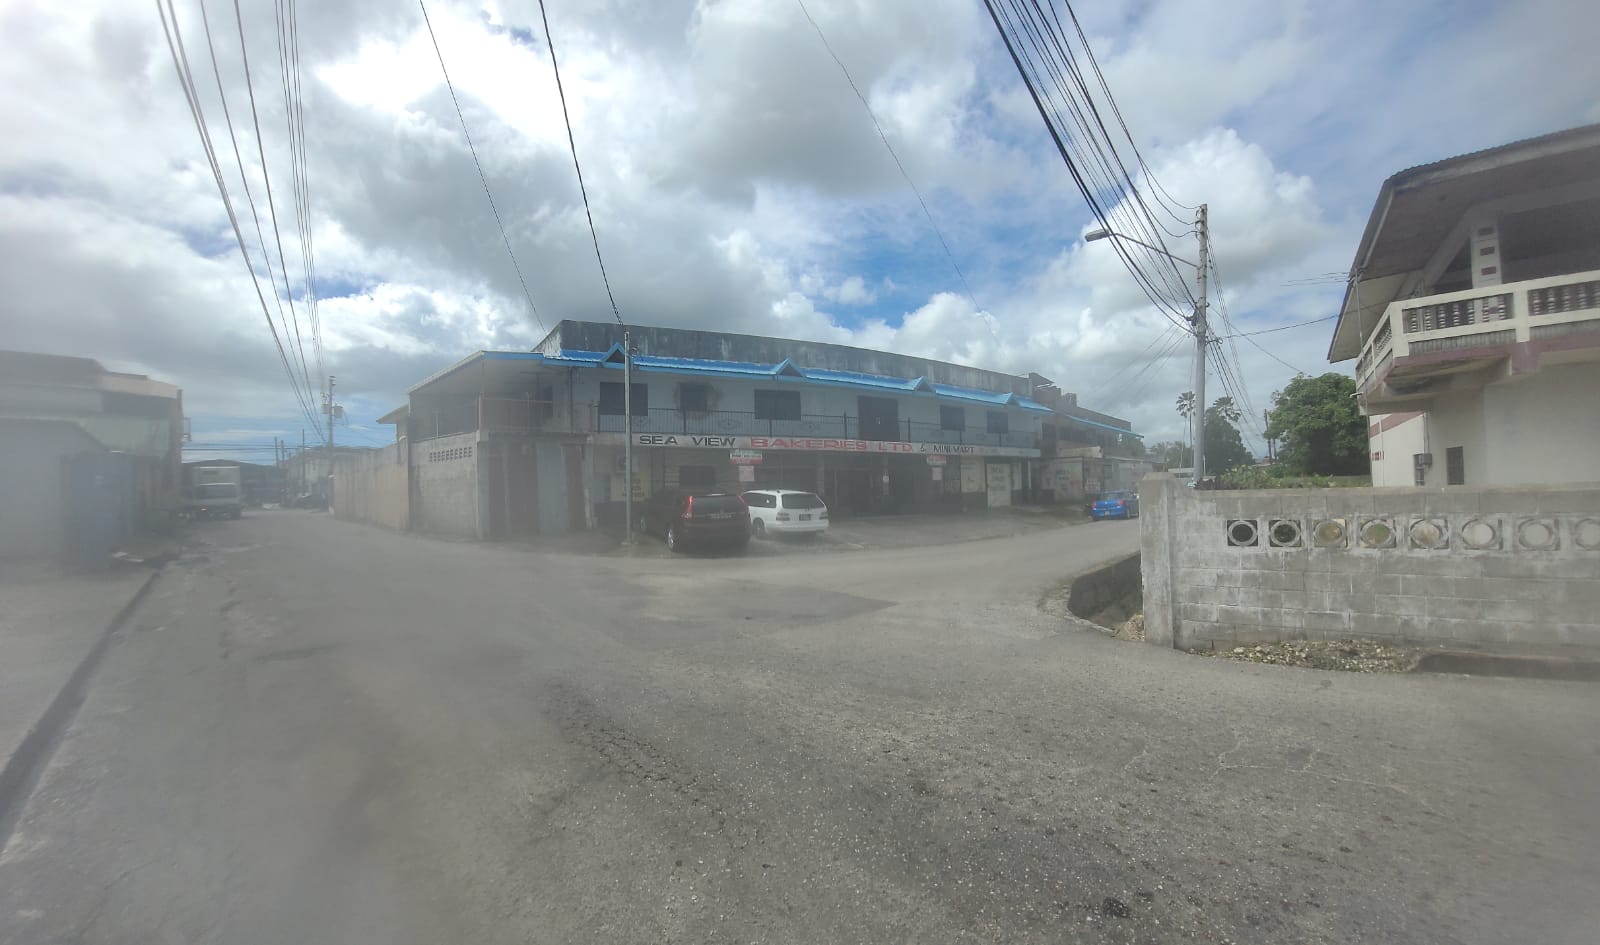 Sangre Grande Two-Story Commercial Building For Sale/Rent. Great Investment Opportunity! Sale: $8,00